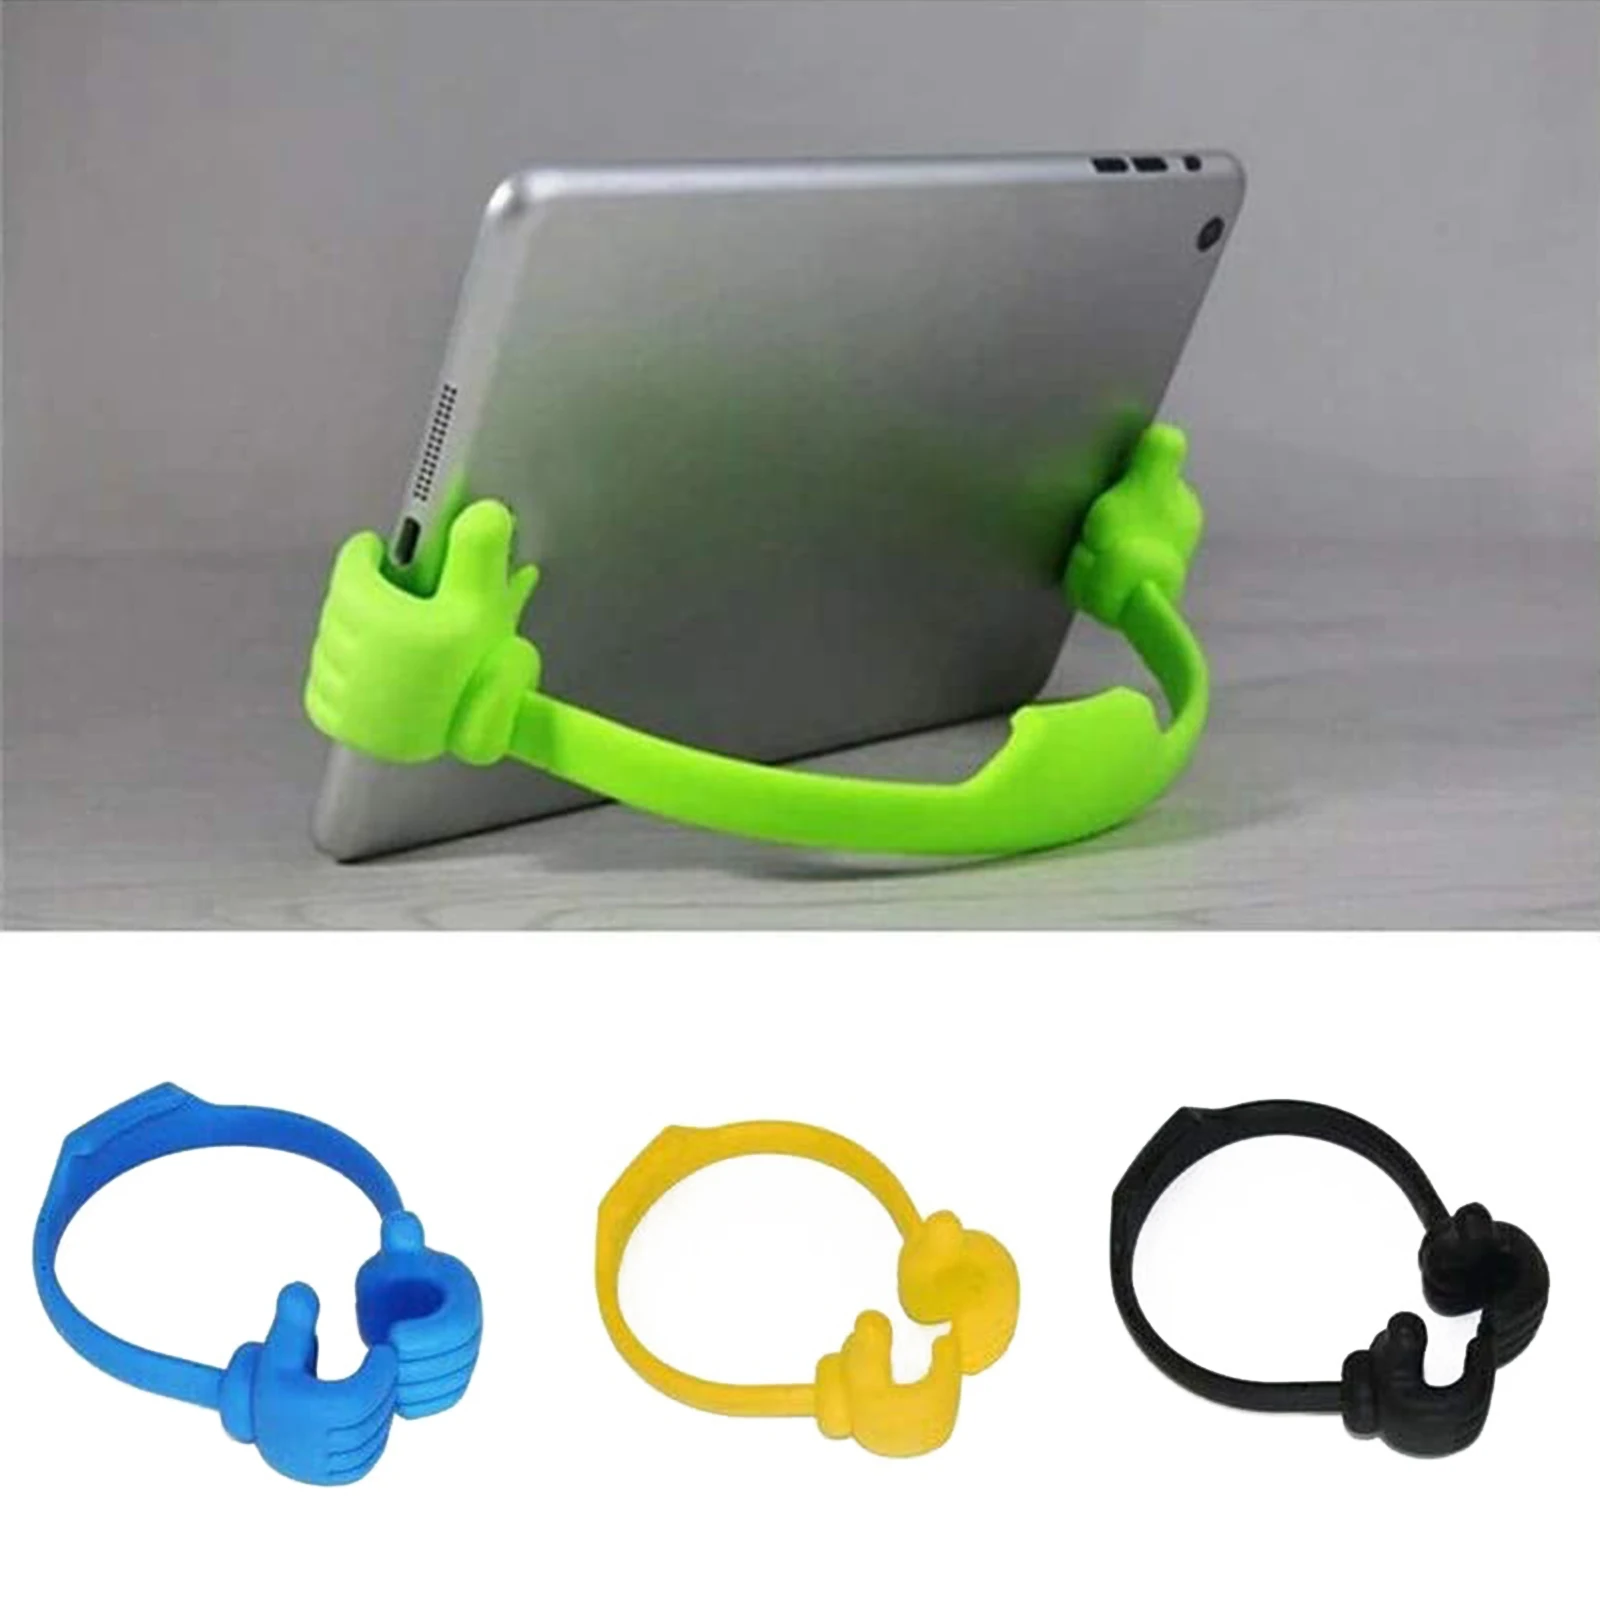 

Thumbs Up Mobile Cell Phone Holder Movie Watching Lazy Bed Desktop Mount Stand Mobile Phone Holders Stands Accessories H-best